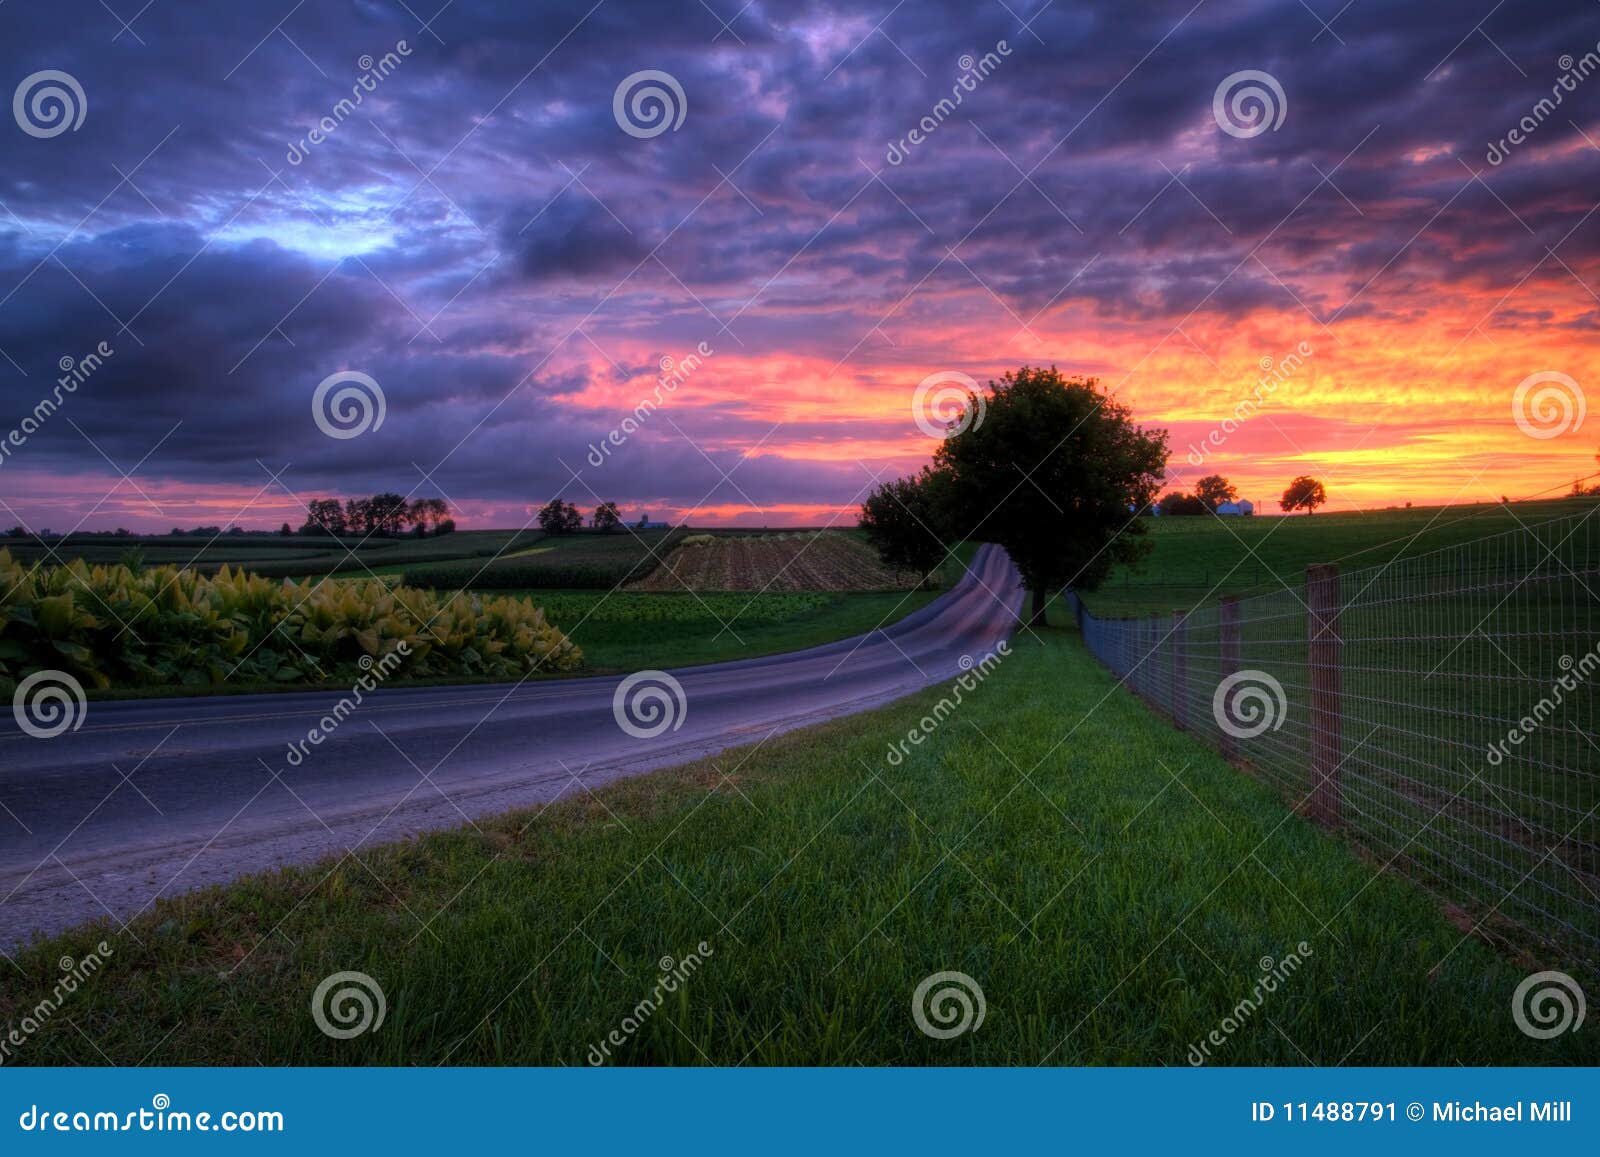 sunset on a country road